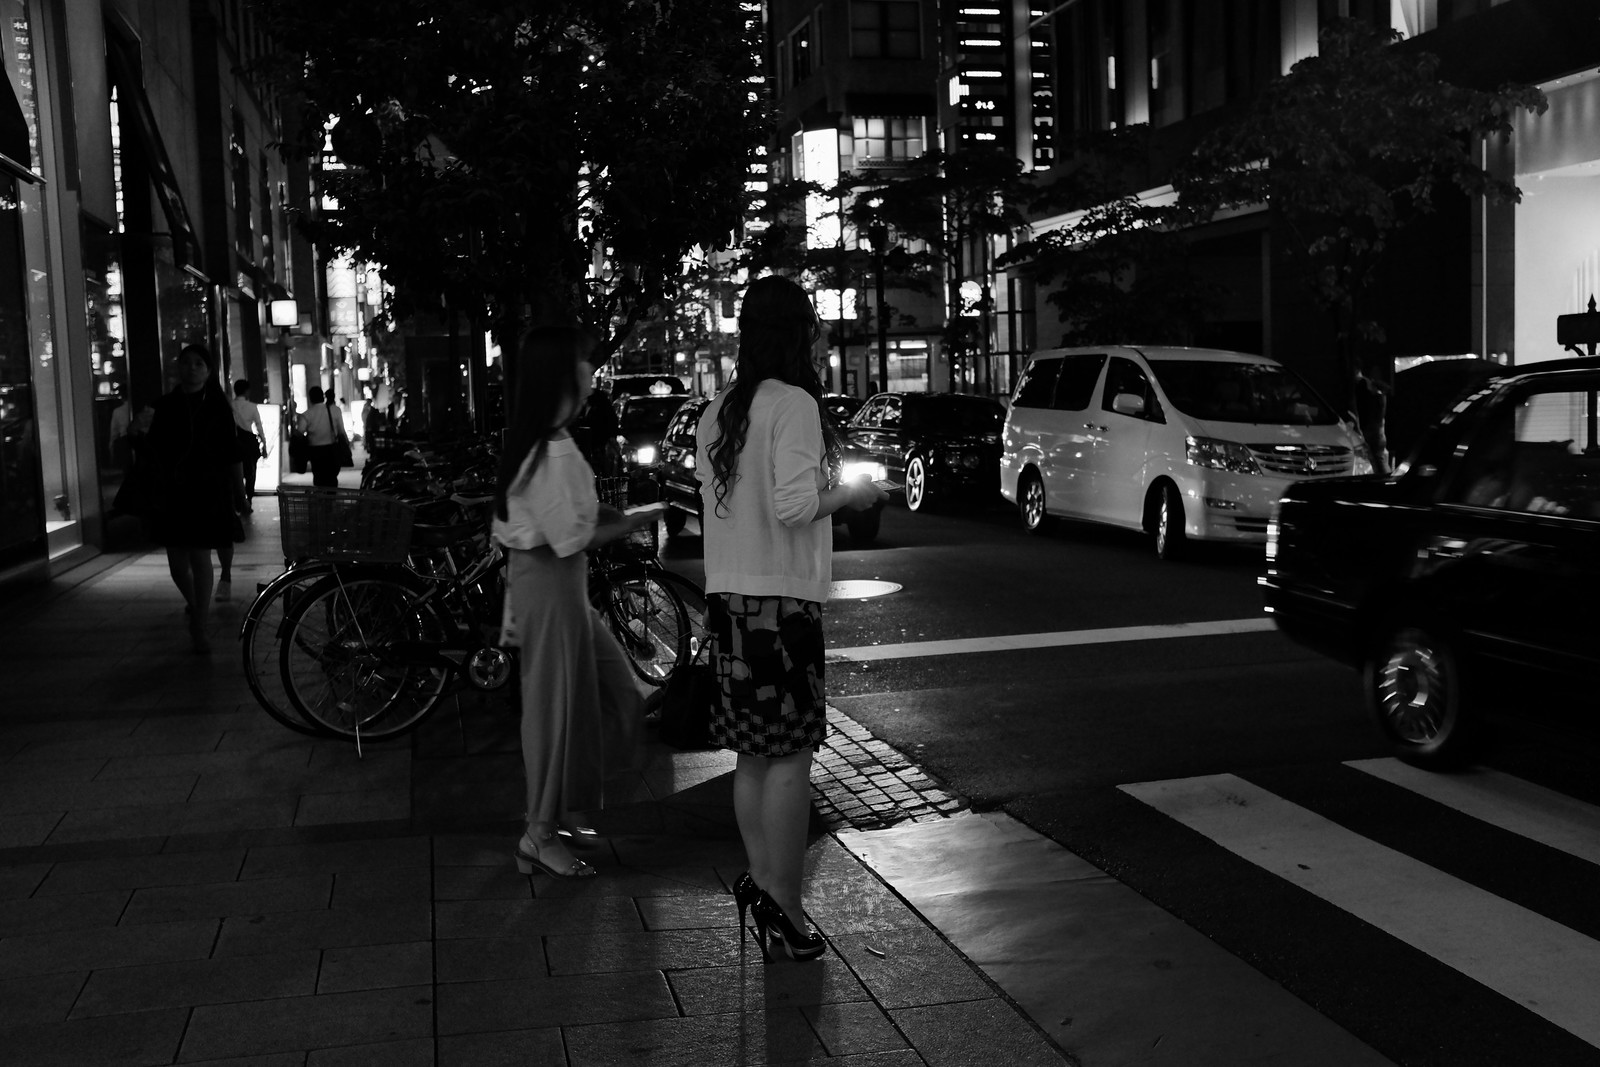 The Ginza night photos in Tokyo, Japan.